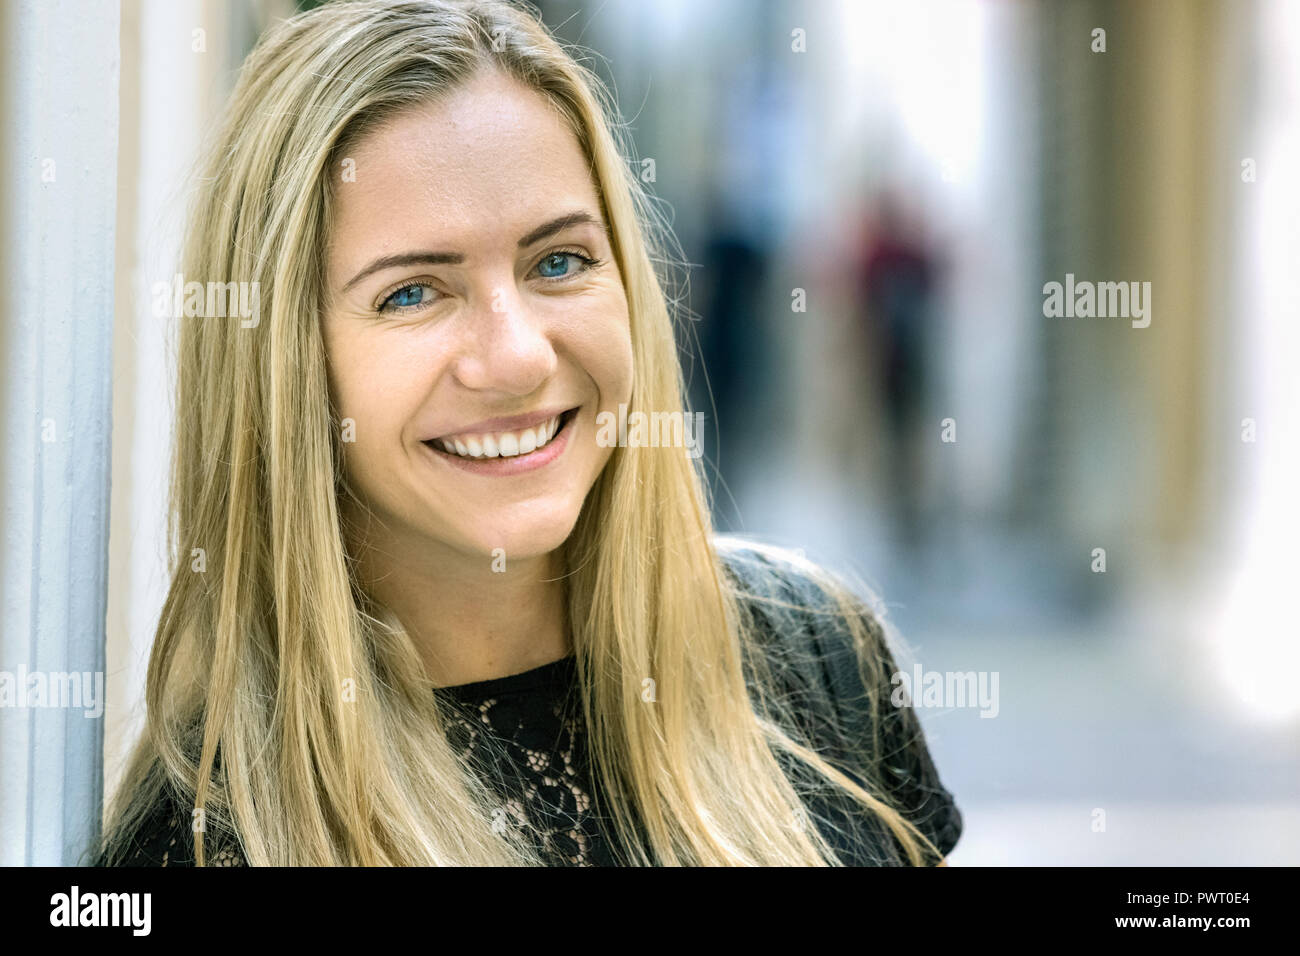 Portrait of a blonde poland young woman, 24 years, looking camera smiling, happy, outdoors. Stock Photo